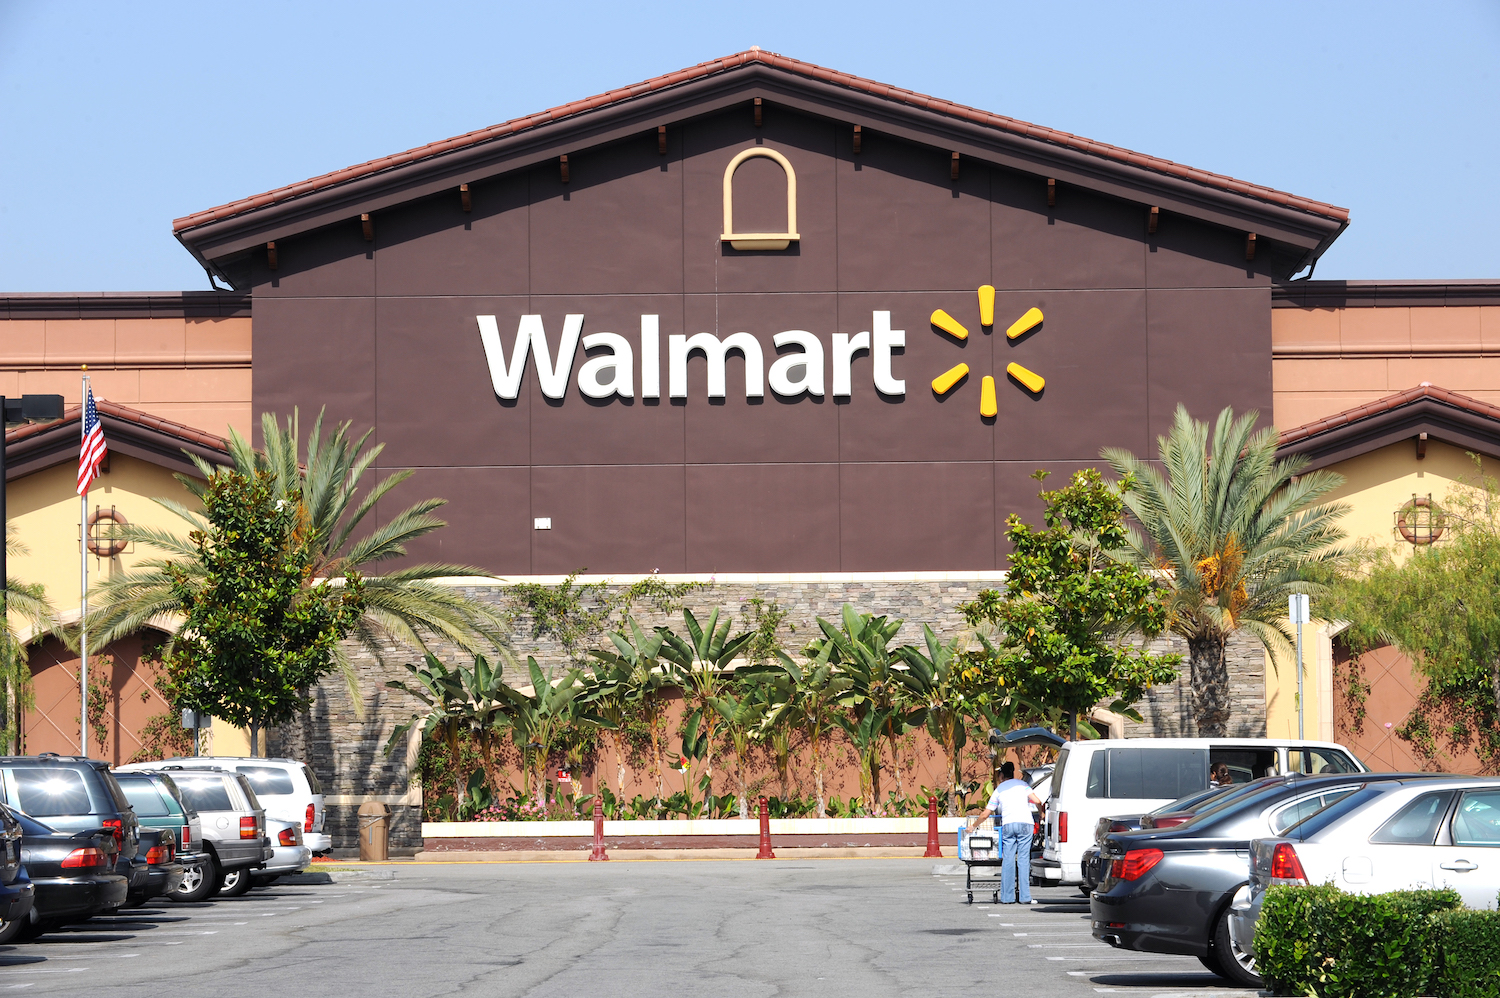 A walmart's storefront, palm trees visible in the foreground.